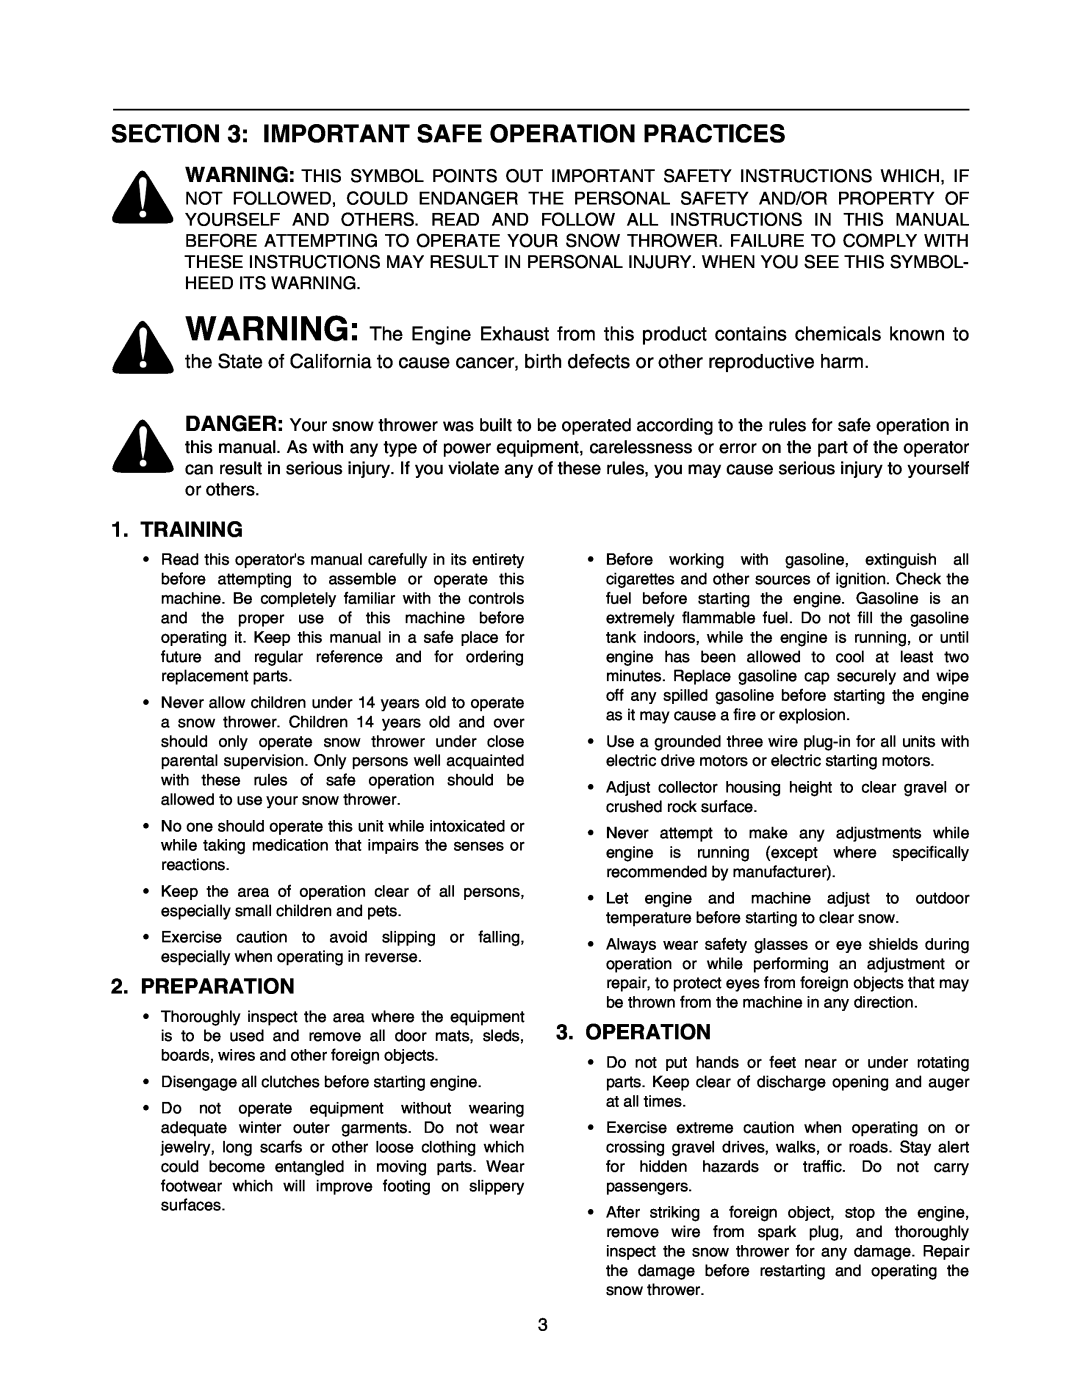 MTD 993 manual Important Safe Operation Practices, Training, Preparation 